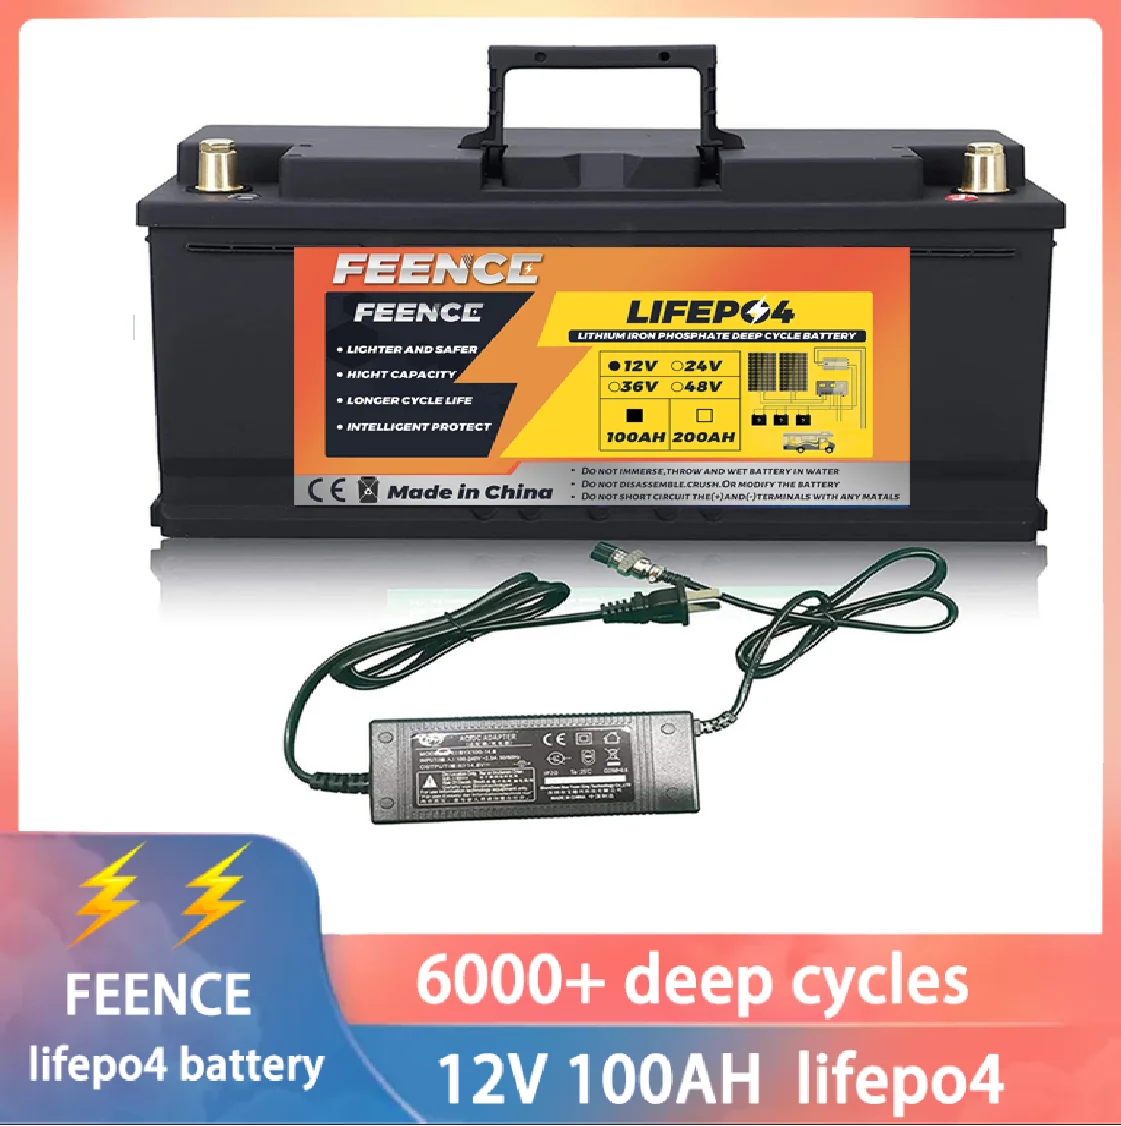 

FEENCE 12V 100AH LiFePO4 Lithium Battery Built-in 100AH BMS 6000+Deep Cycles Backup Power for Golf cart Camper RV Energy Storage